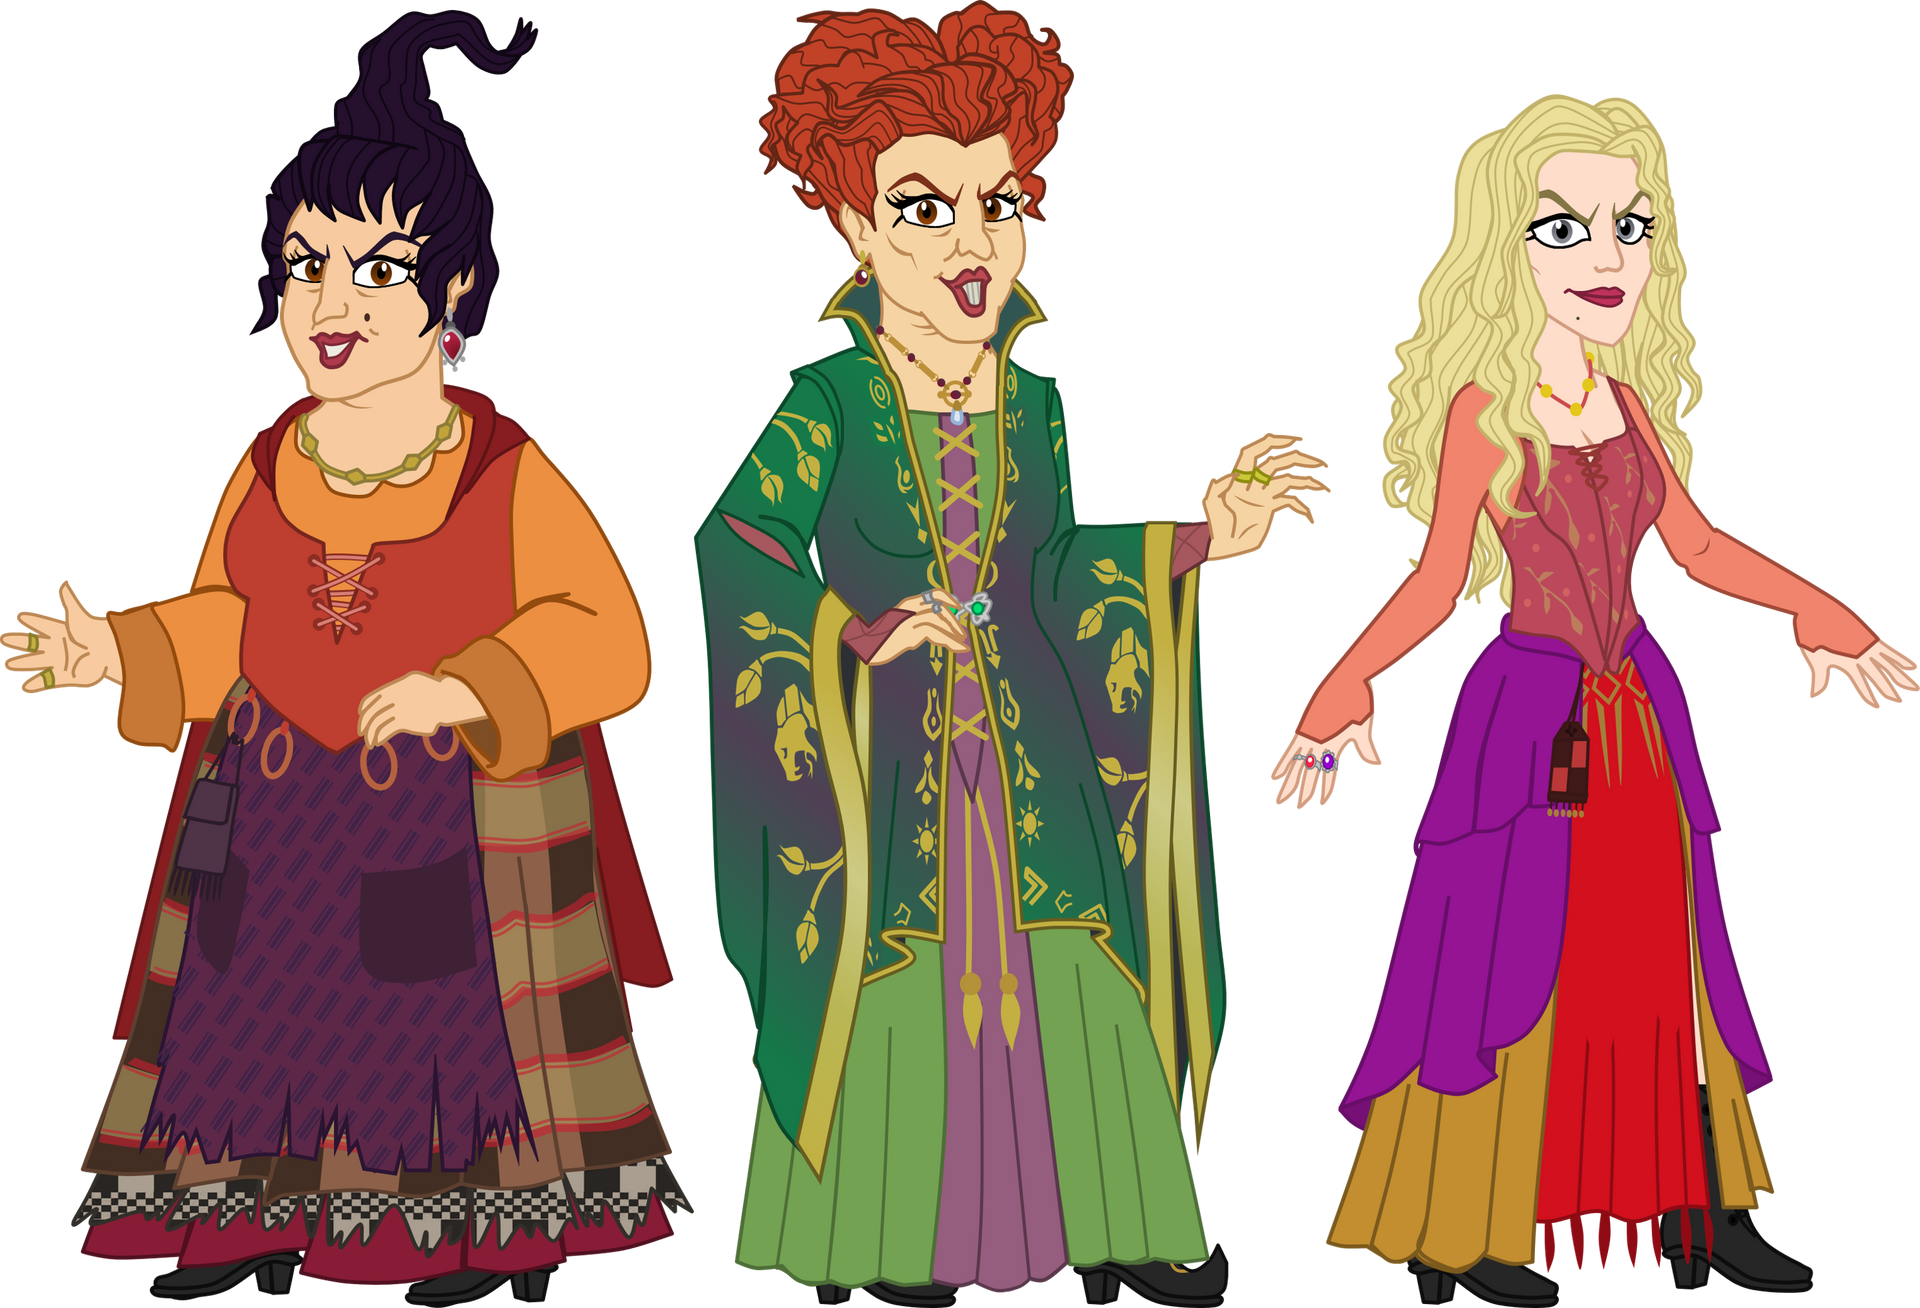 The Sanderson Sisters (Equestria Girls Style) by Shadymeadow95 on DeviantArt